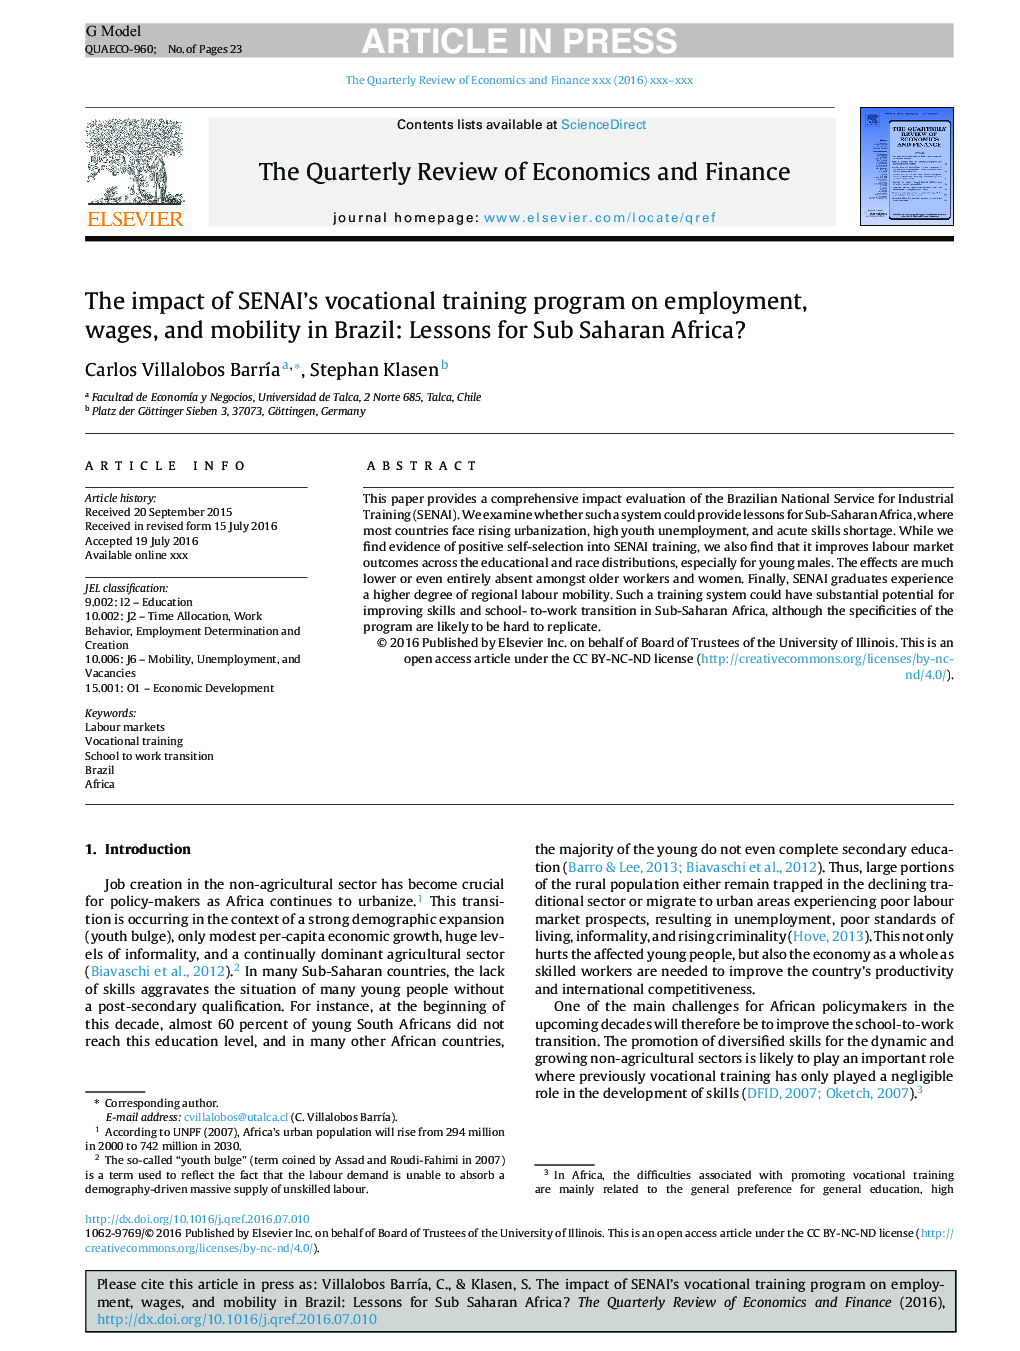 The impact of SENAI's vocational training program on employment, wages, and mobility in Brazil: Lessons for Sub Saharan Africa?